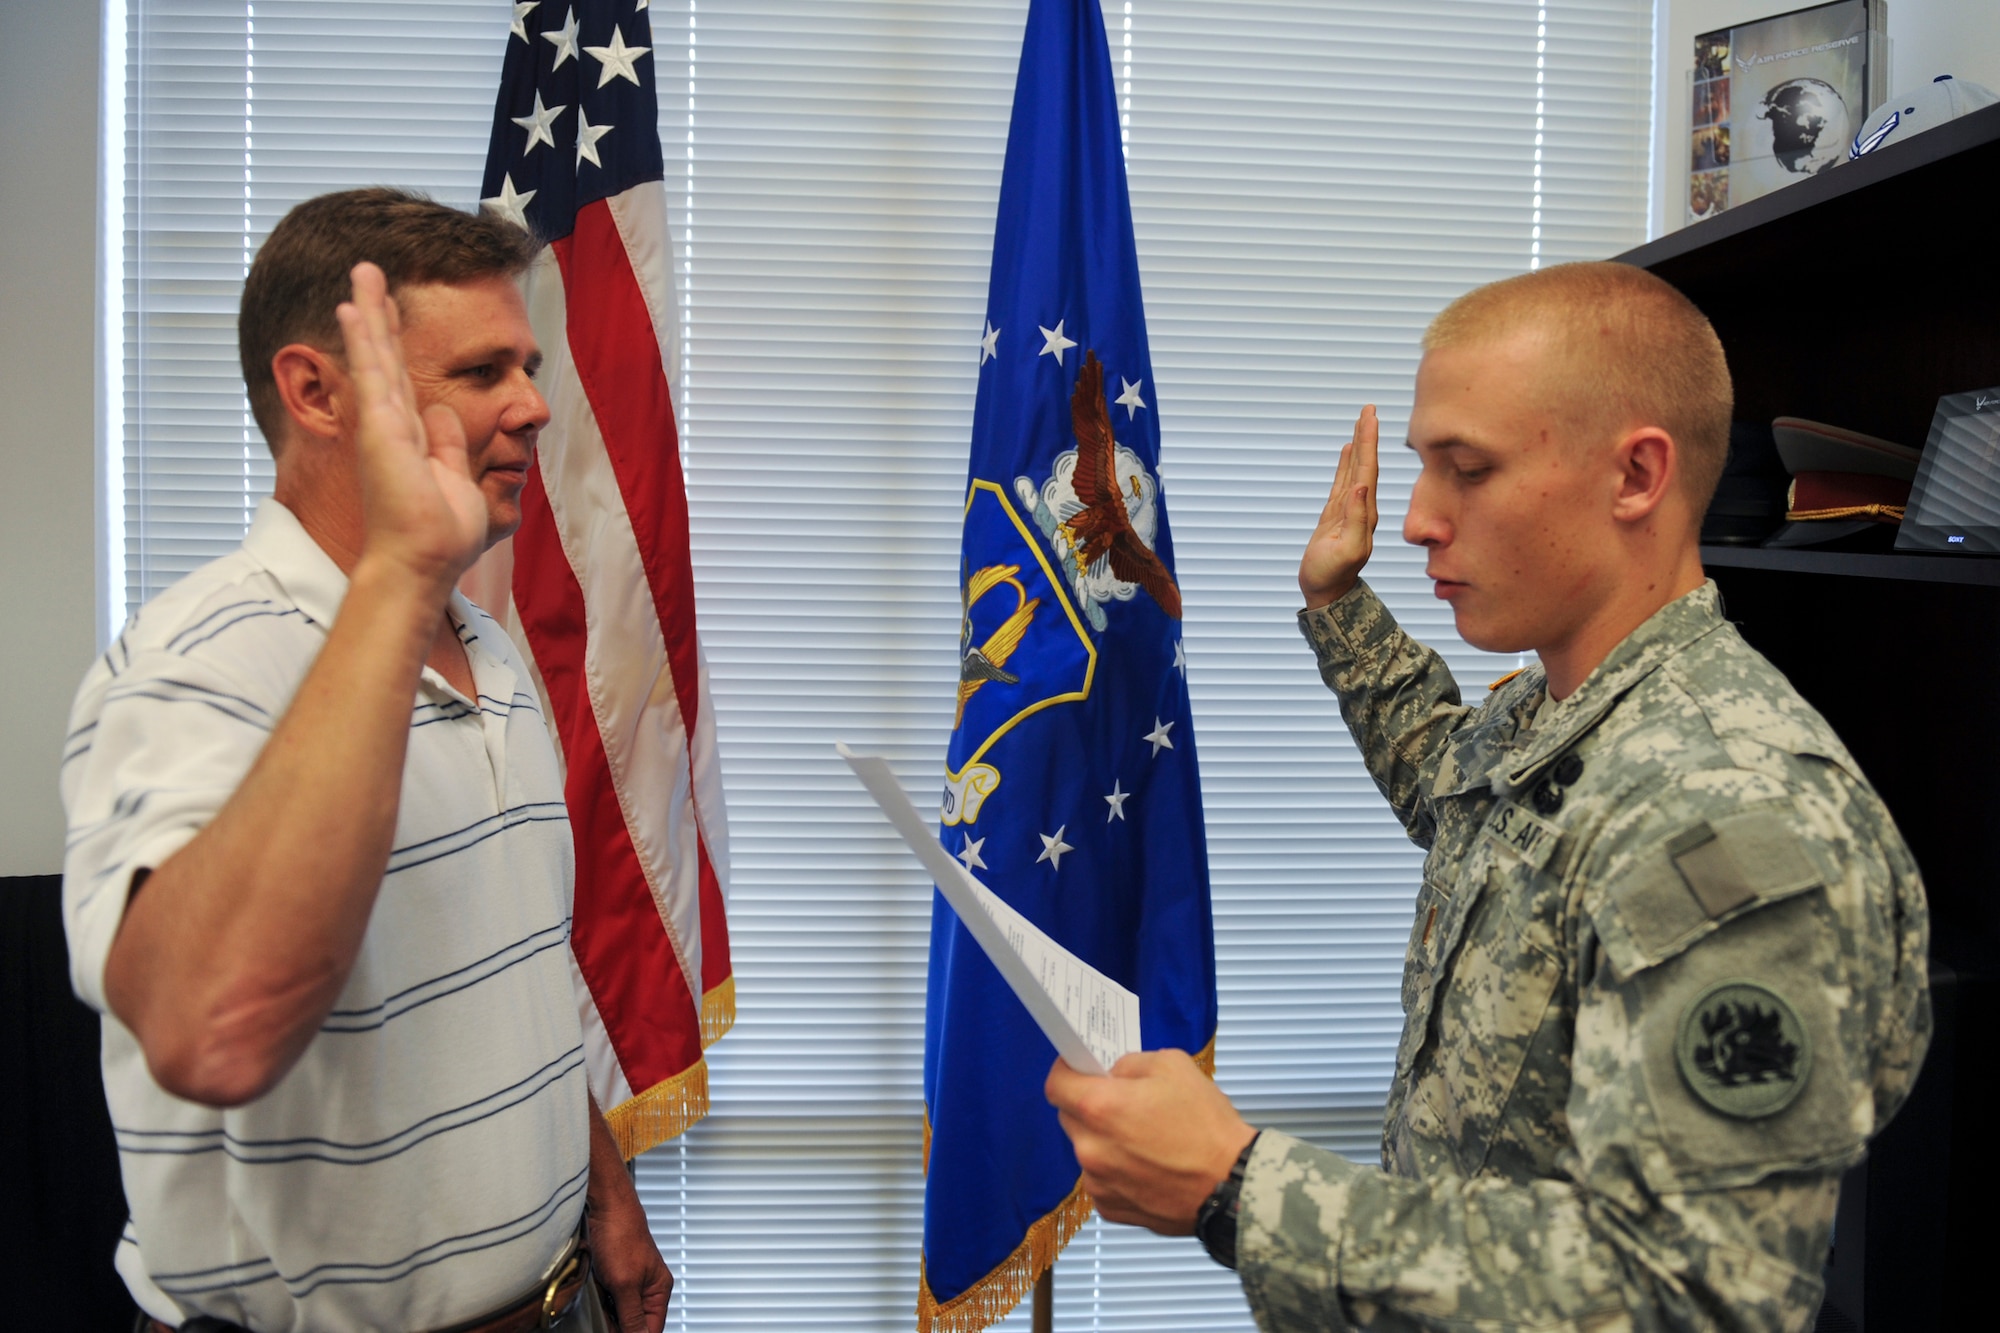 Scott Long recites the Oath of Enlistment after his son, U.S. Army 2nd Lt. Brandon Long, during a ceremony July 28, 2011, in Valdosta, Ga. Lieutenant Long is a liaison officer with the 1-169 Aviation Support Battalion and said he was honored to preside over his father’s ceremony since his father pinned on his officer rank earlier this year. (U.S. Air Force photo by Staff Sgt. Jamal D. Sutter/Released)